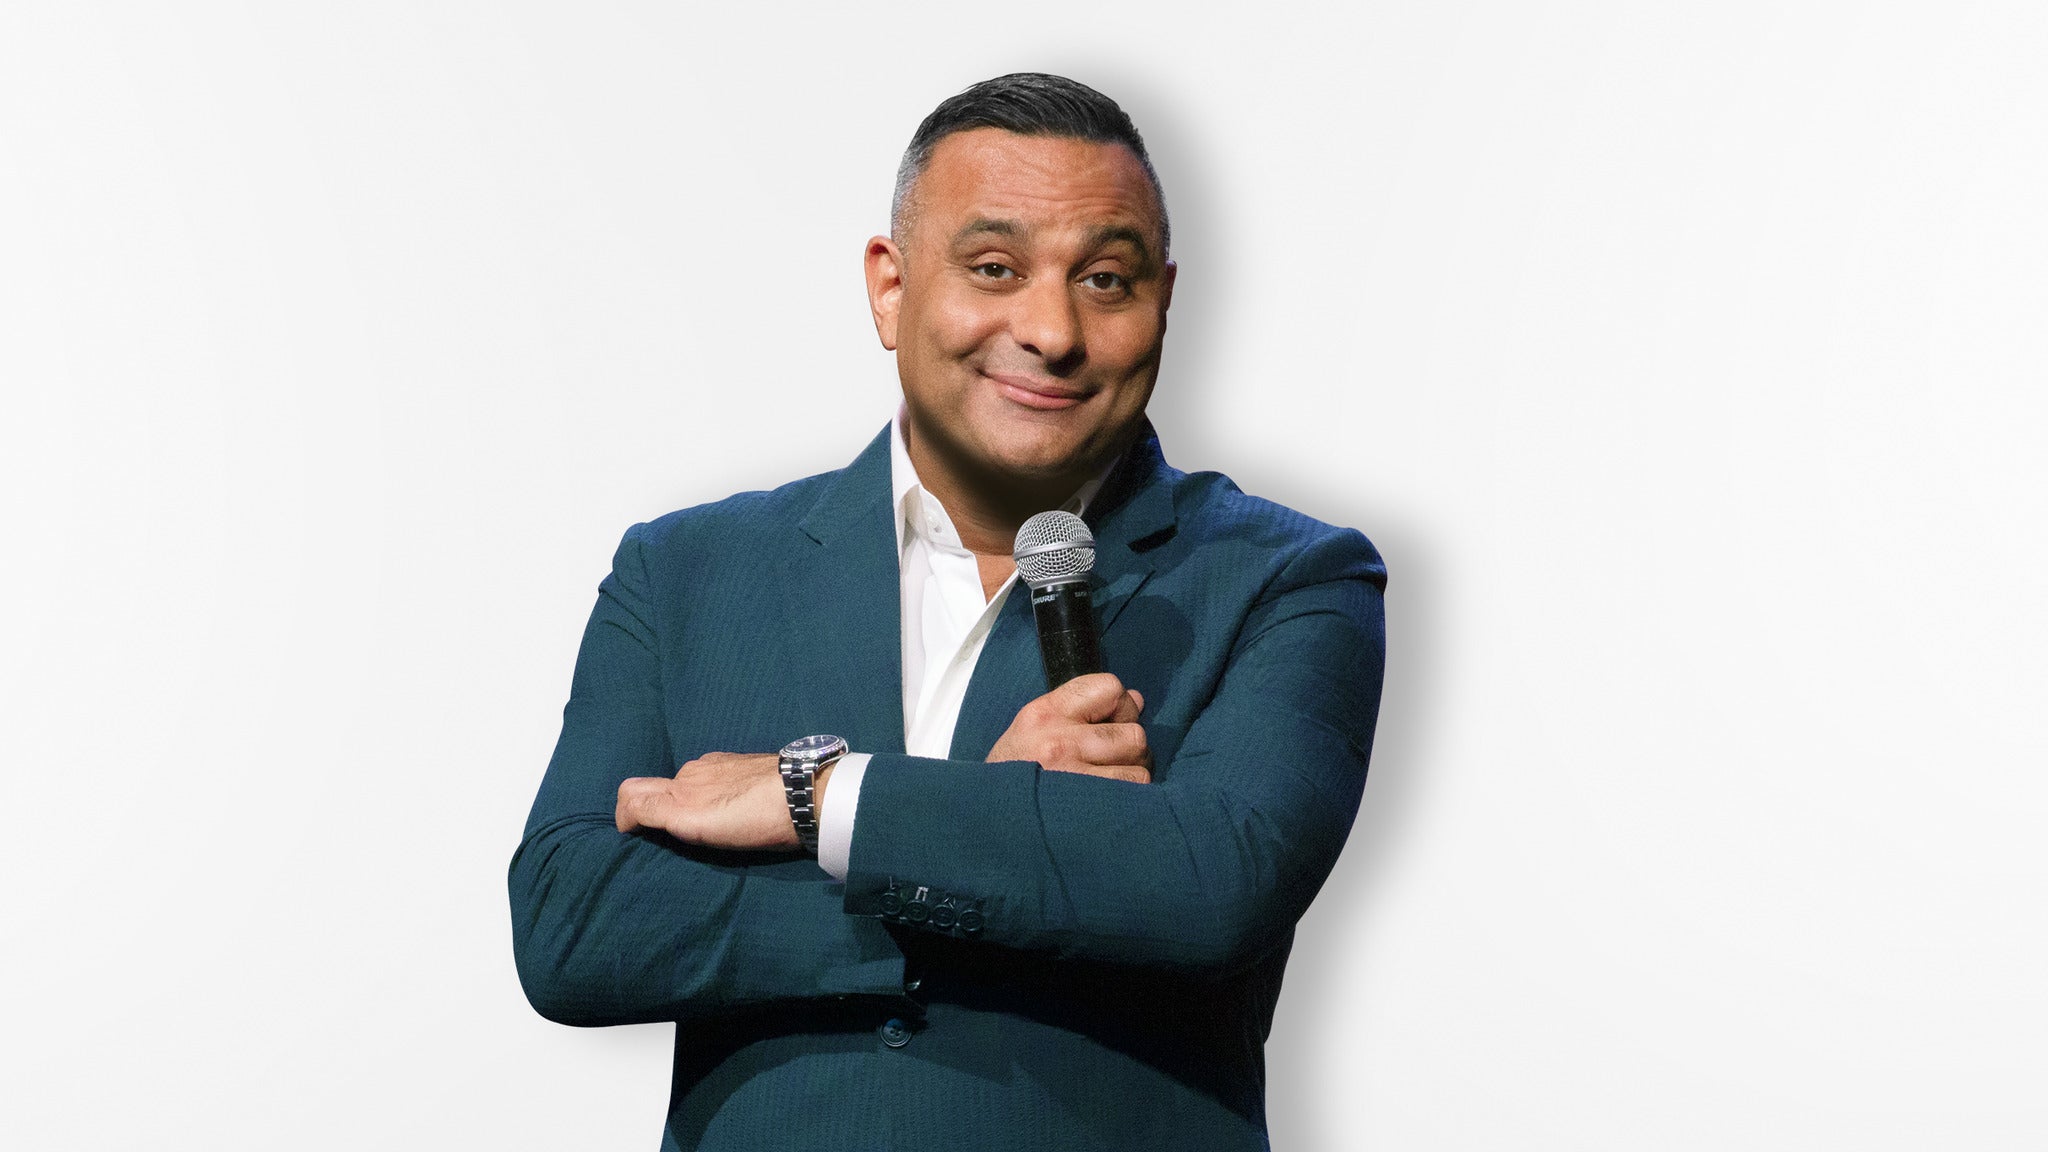 Image used with permission from Ticketmaster | Russell Peters - Act Your Age World Tour tickets